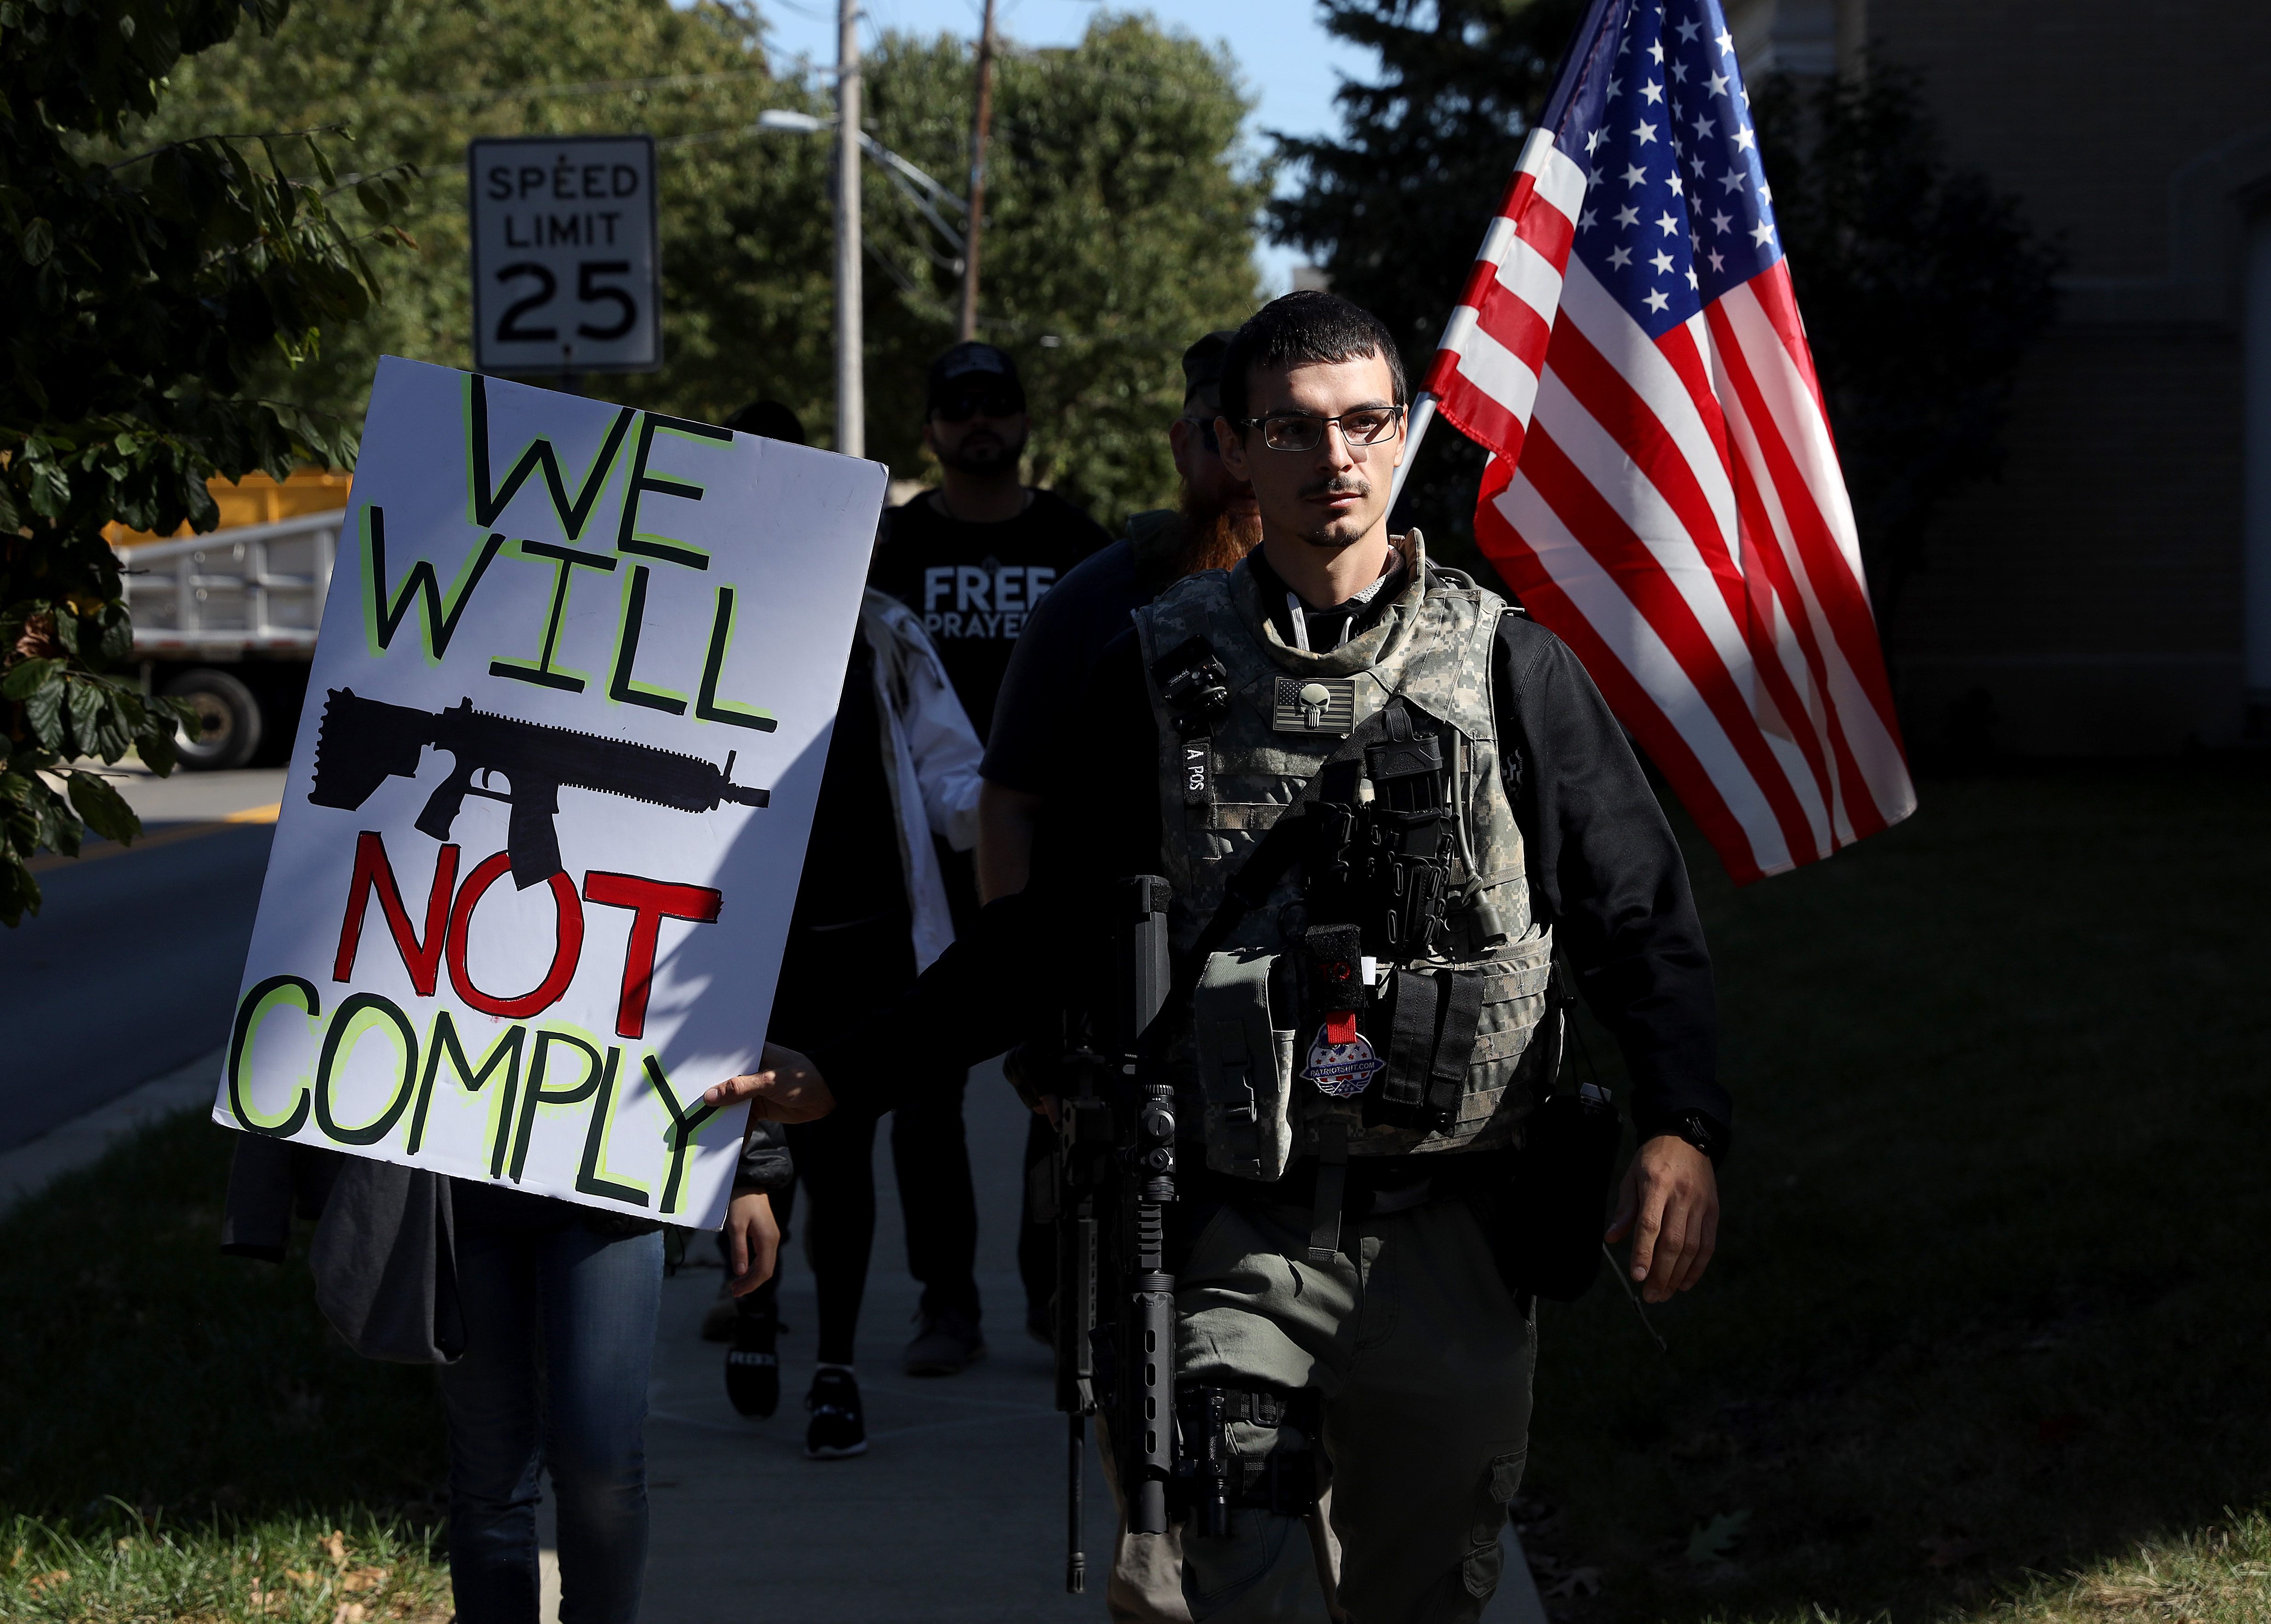 Gun rights supporters walk to the campus of Otterbein University on Oct. 15, 2019 in Westerville, Ohio.